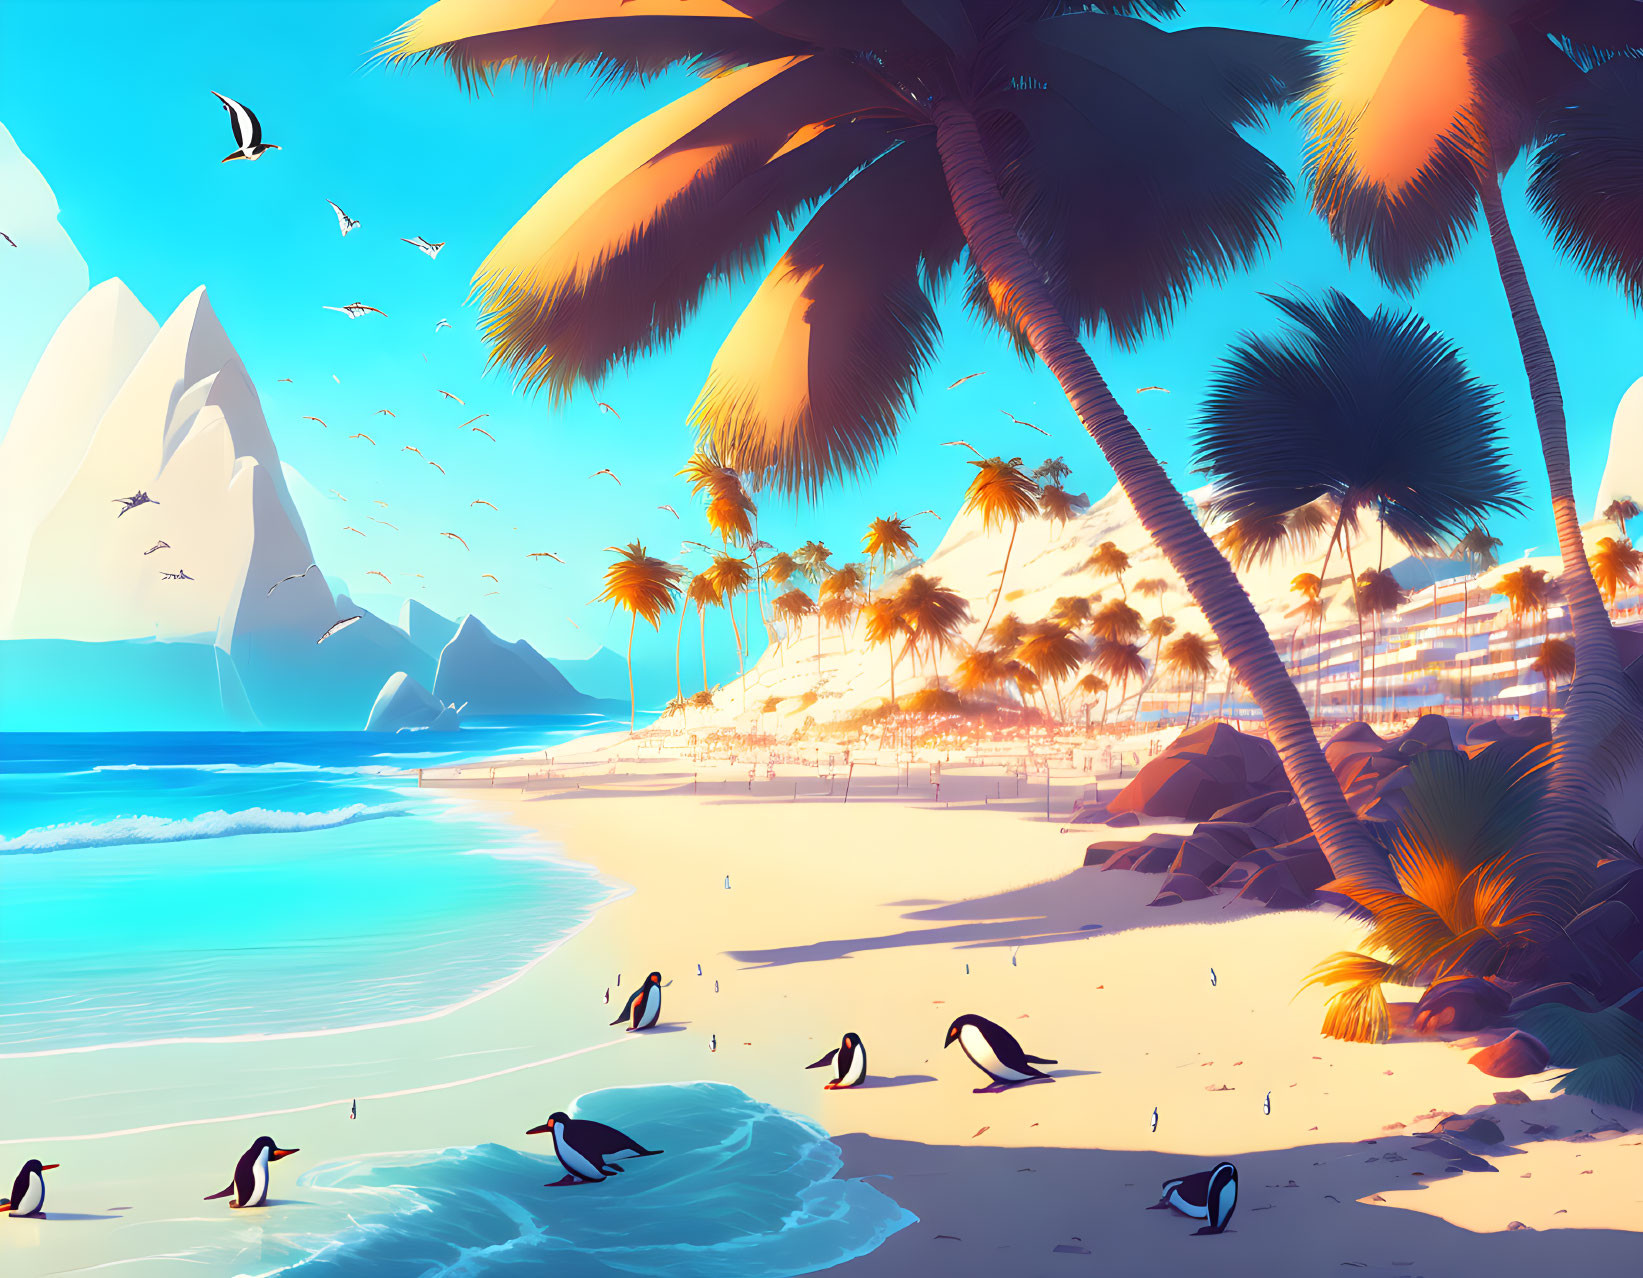 Tropical beach scene with palm trees, penguins, clear water, mountains, birds, and sunlight